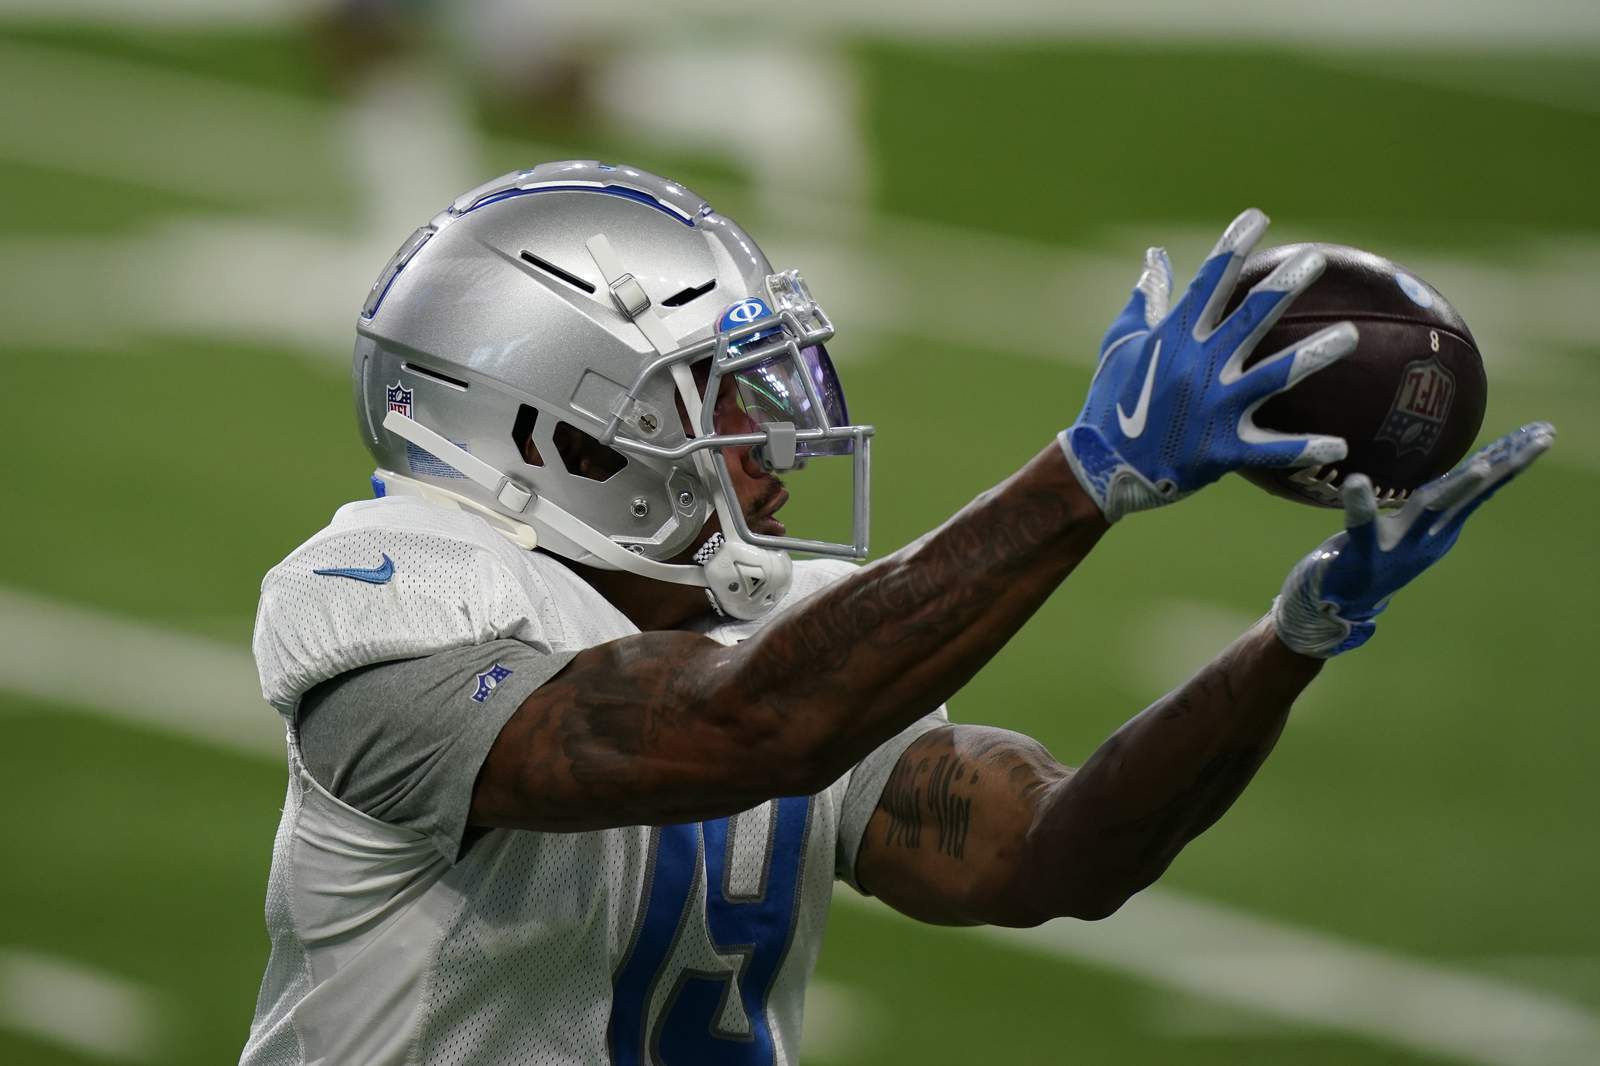 Lions WR Golladay makes 2020 debut; Bucs' Godwin also active